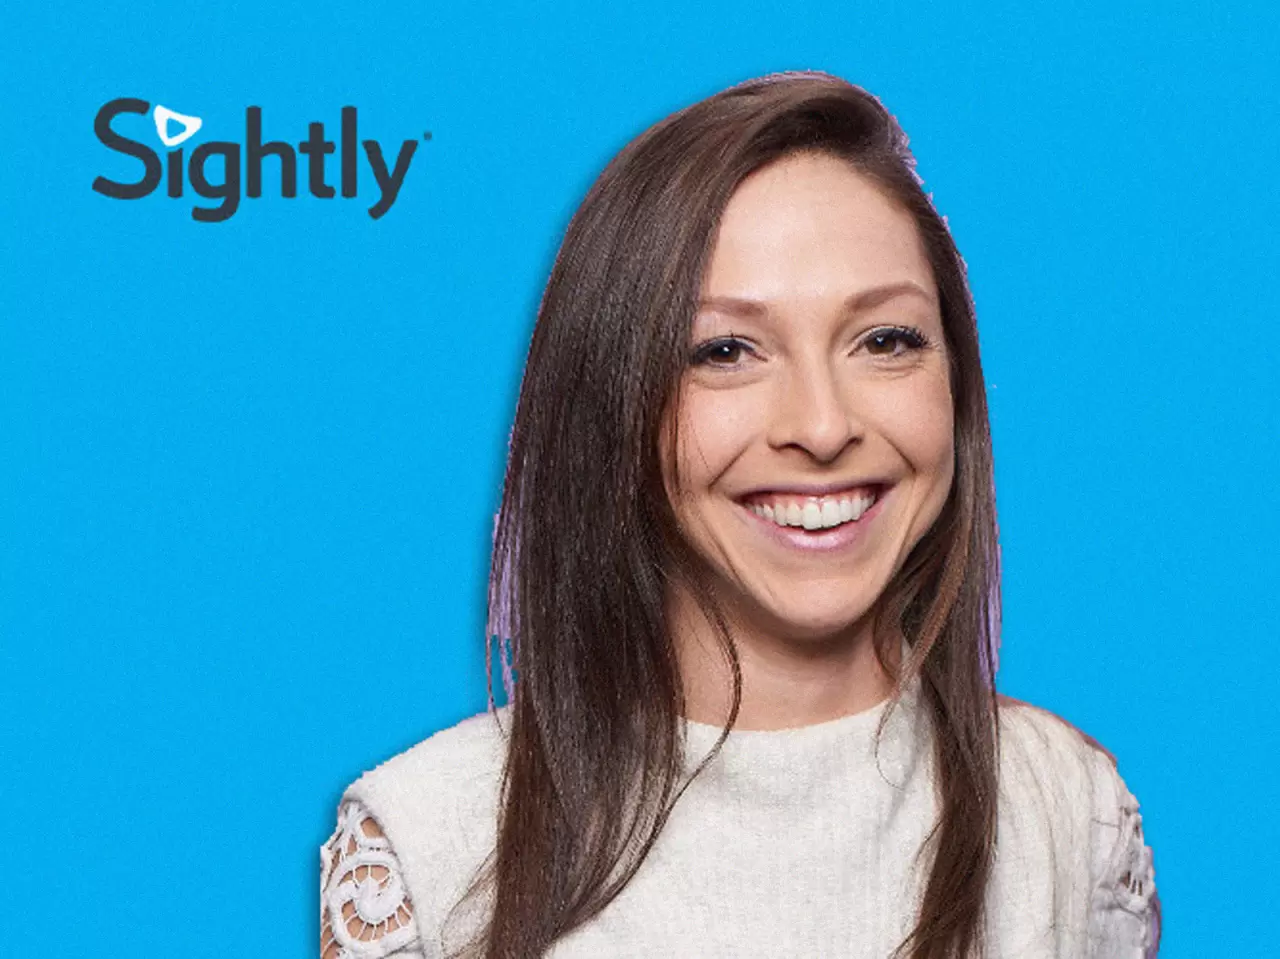 Sightly Taps Former Suzy Exec Emily Korengold to Drive Intelligence Software Push img#1